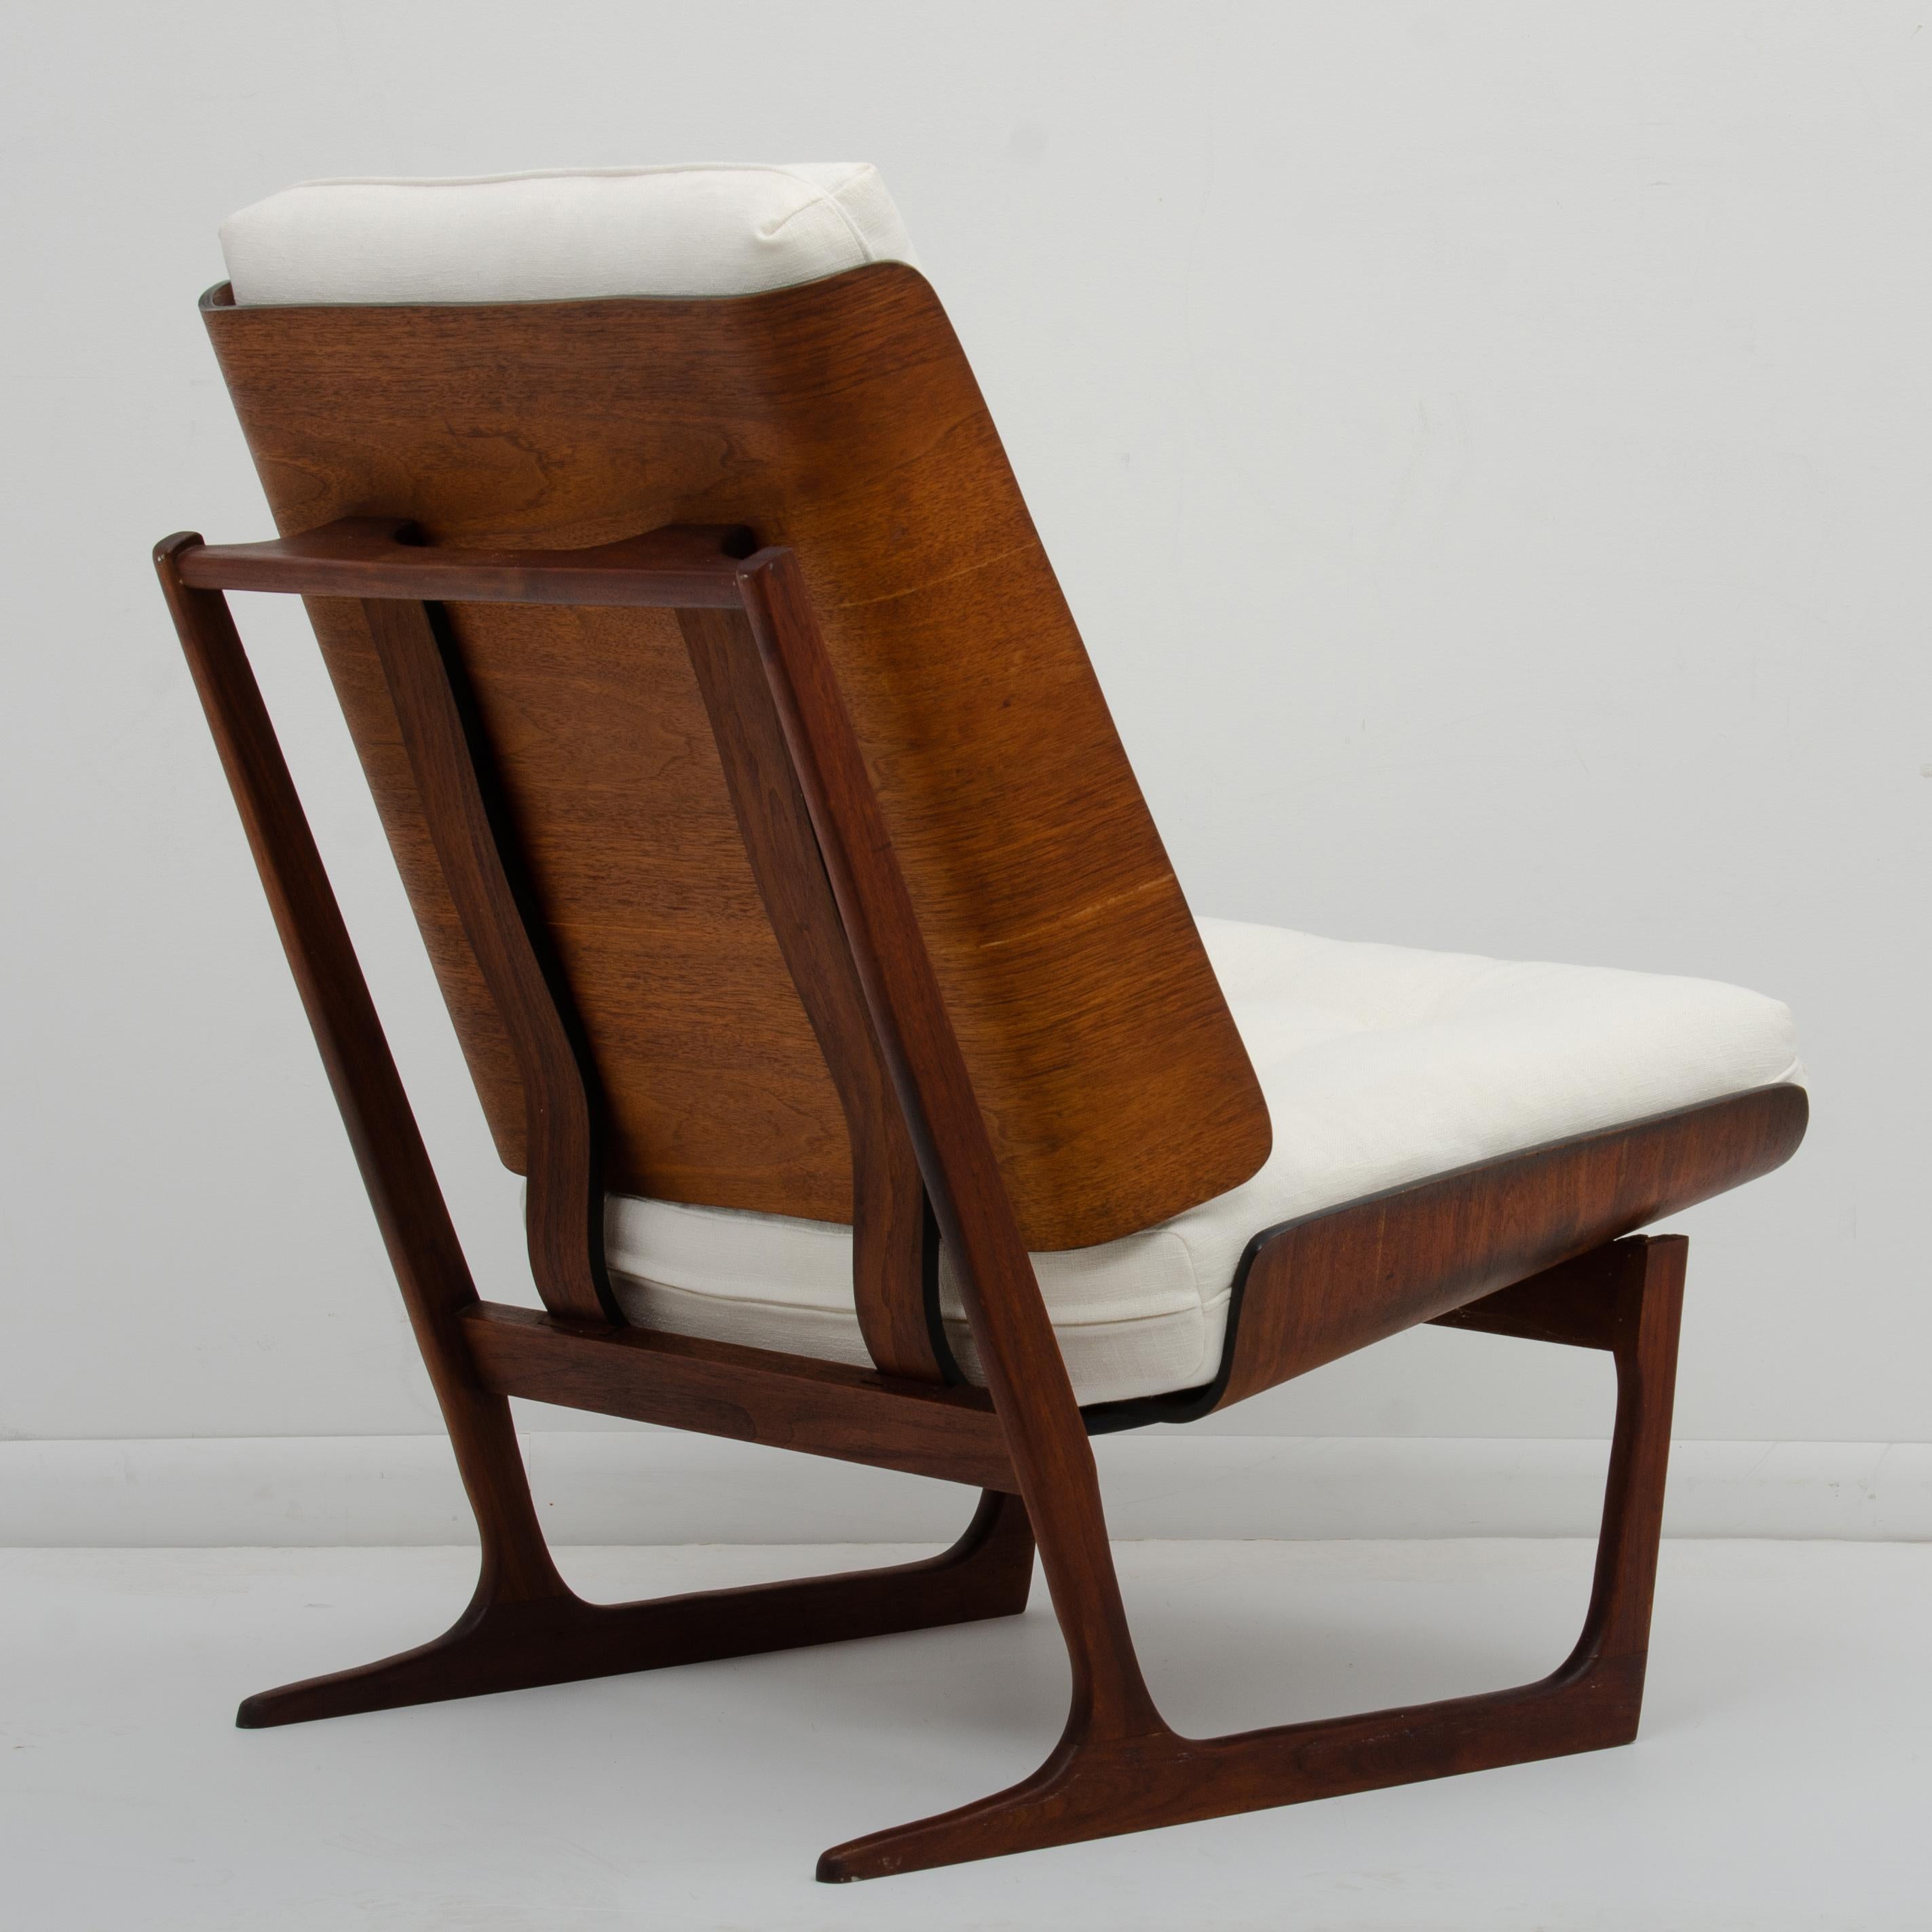 American Hans Juergens Deco House Walnut Sled Lounge Chair Grete Jalk, 1960s